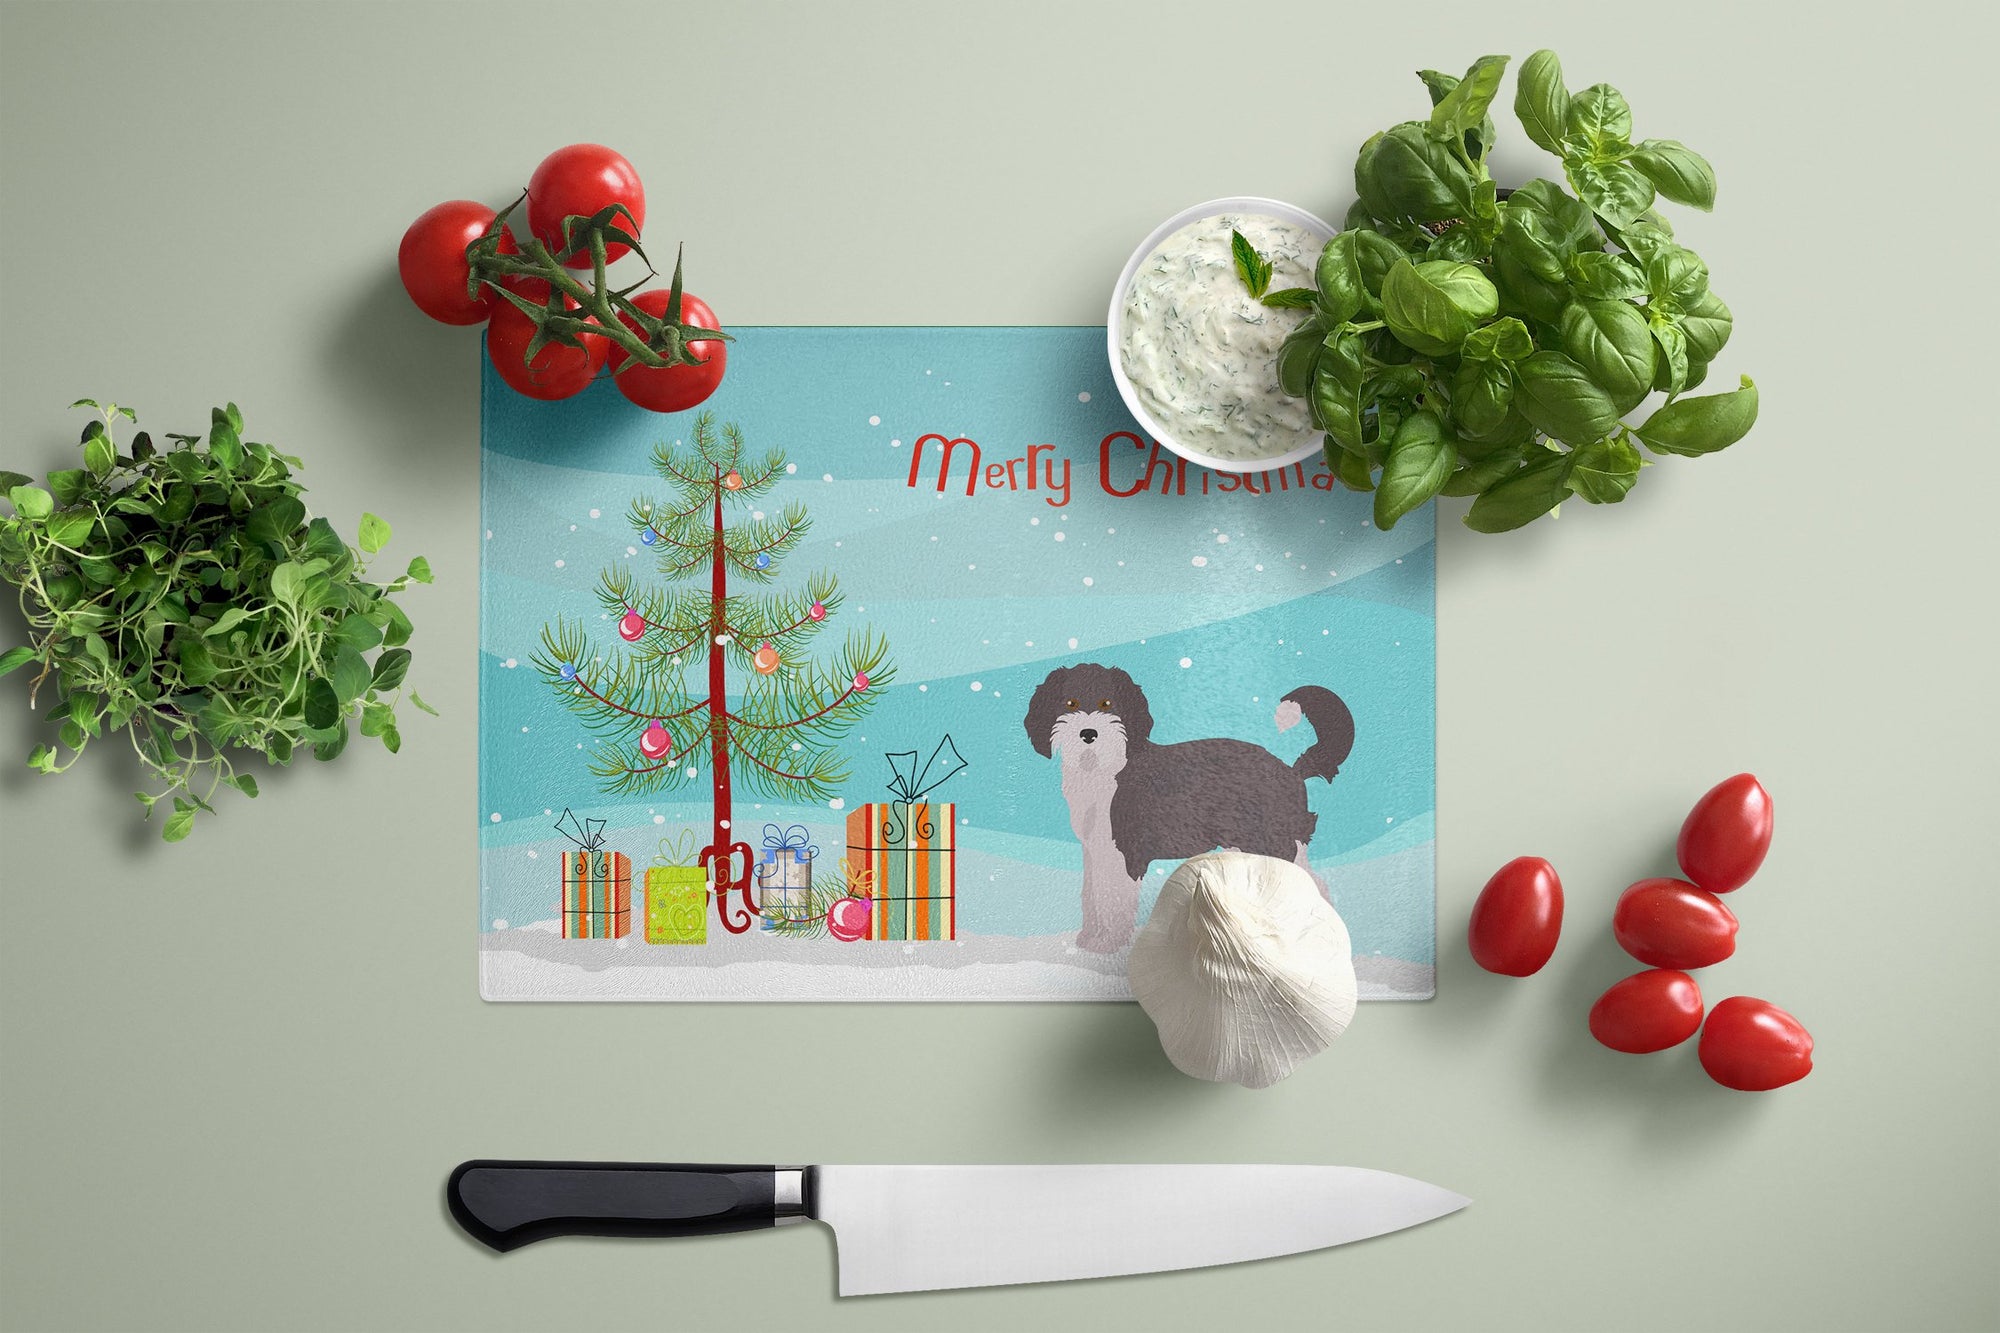 Aussiedoodle #1 Christmas Tree Glass Cutting Board Large CK3800LCB by Caroline's Treasures